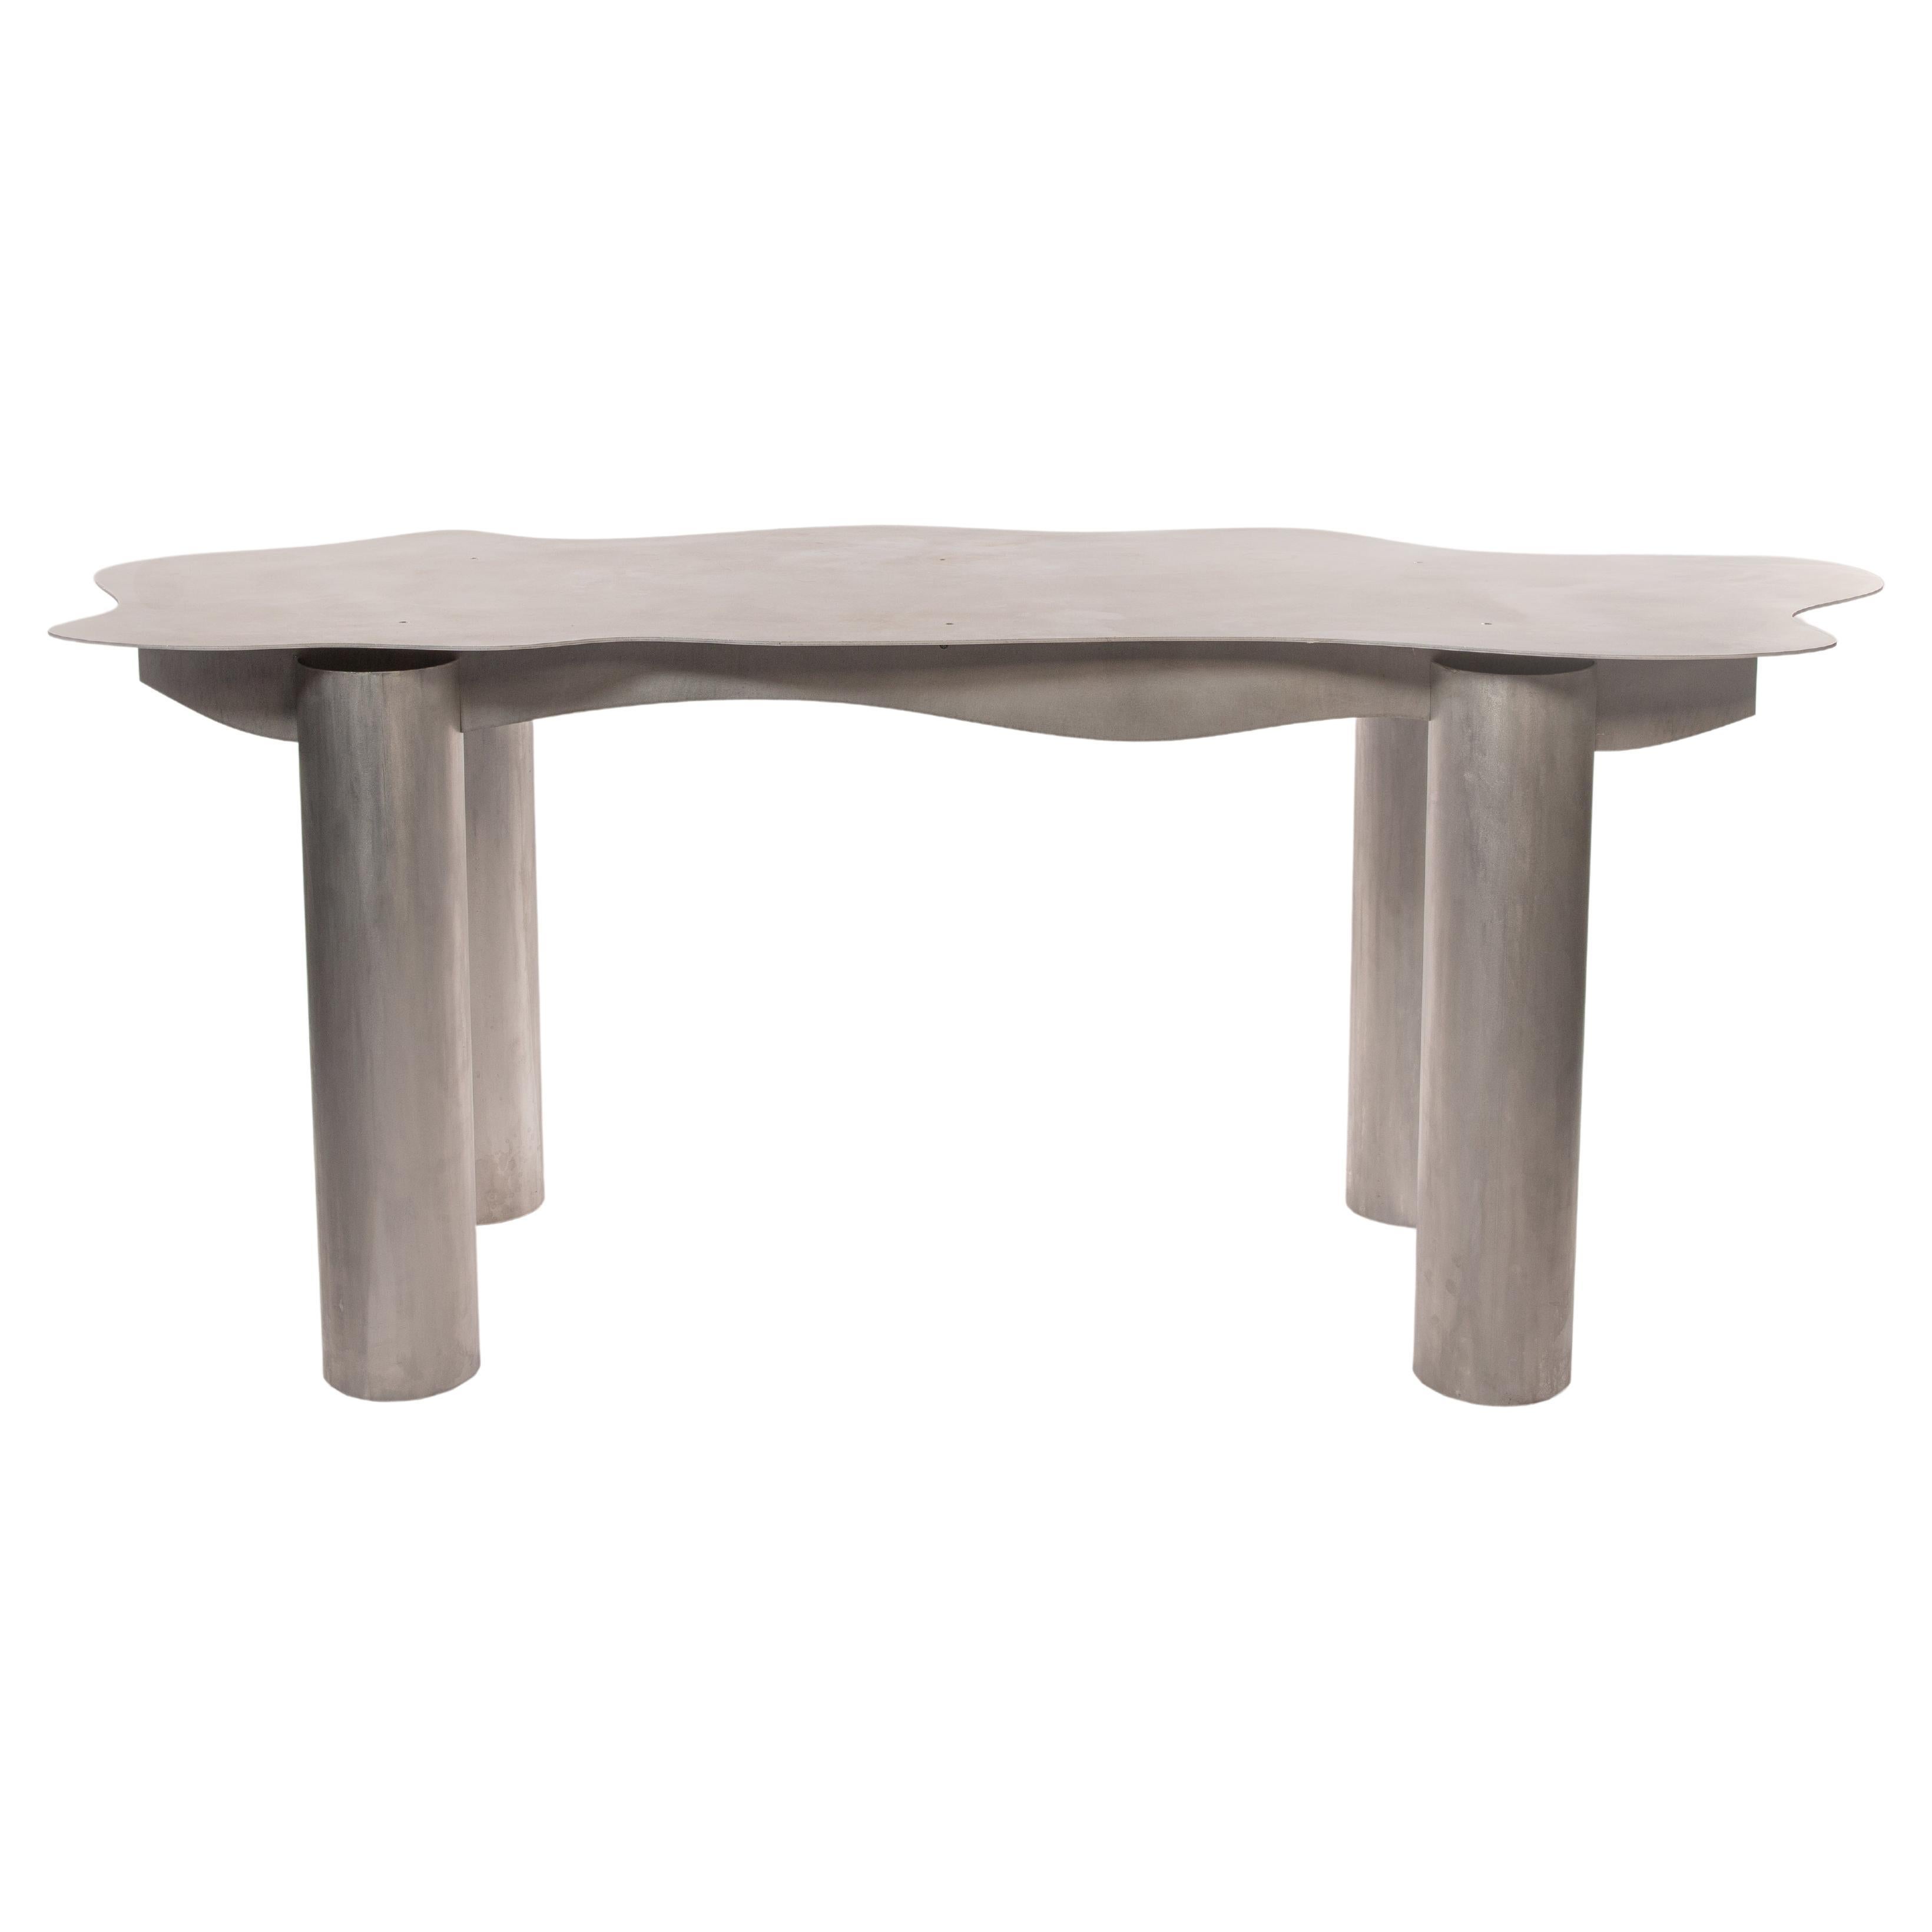 'Contemporary Vanity' Table by Joseph Ellwood for Six Dots For Sale